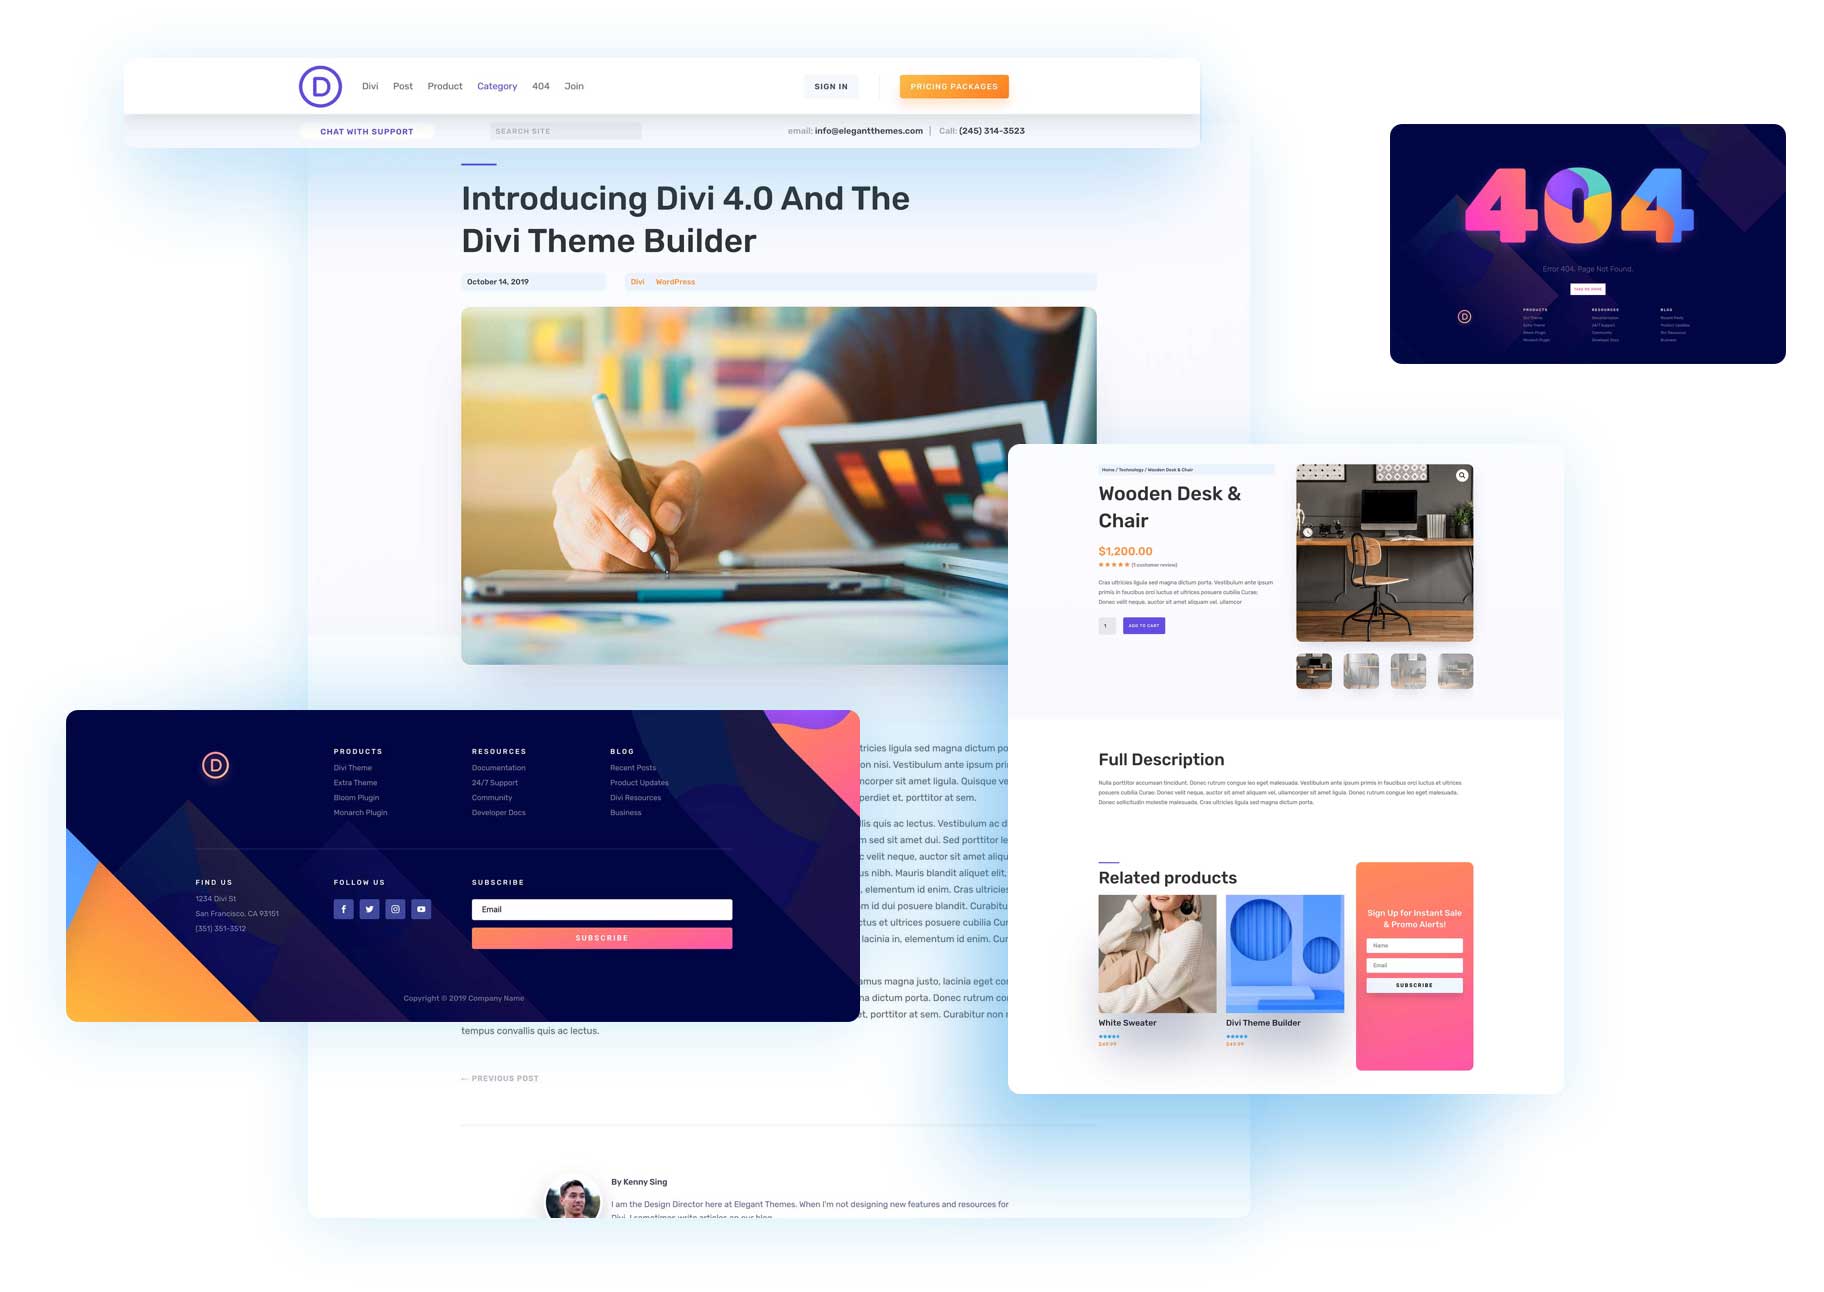 Download the Fifth FREE Theme Builder Pack for Divi